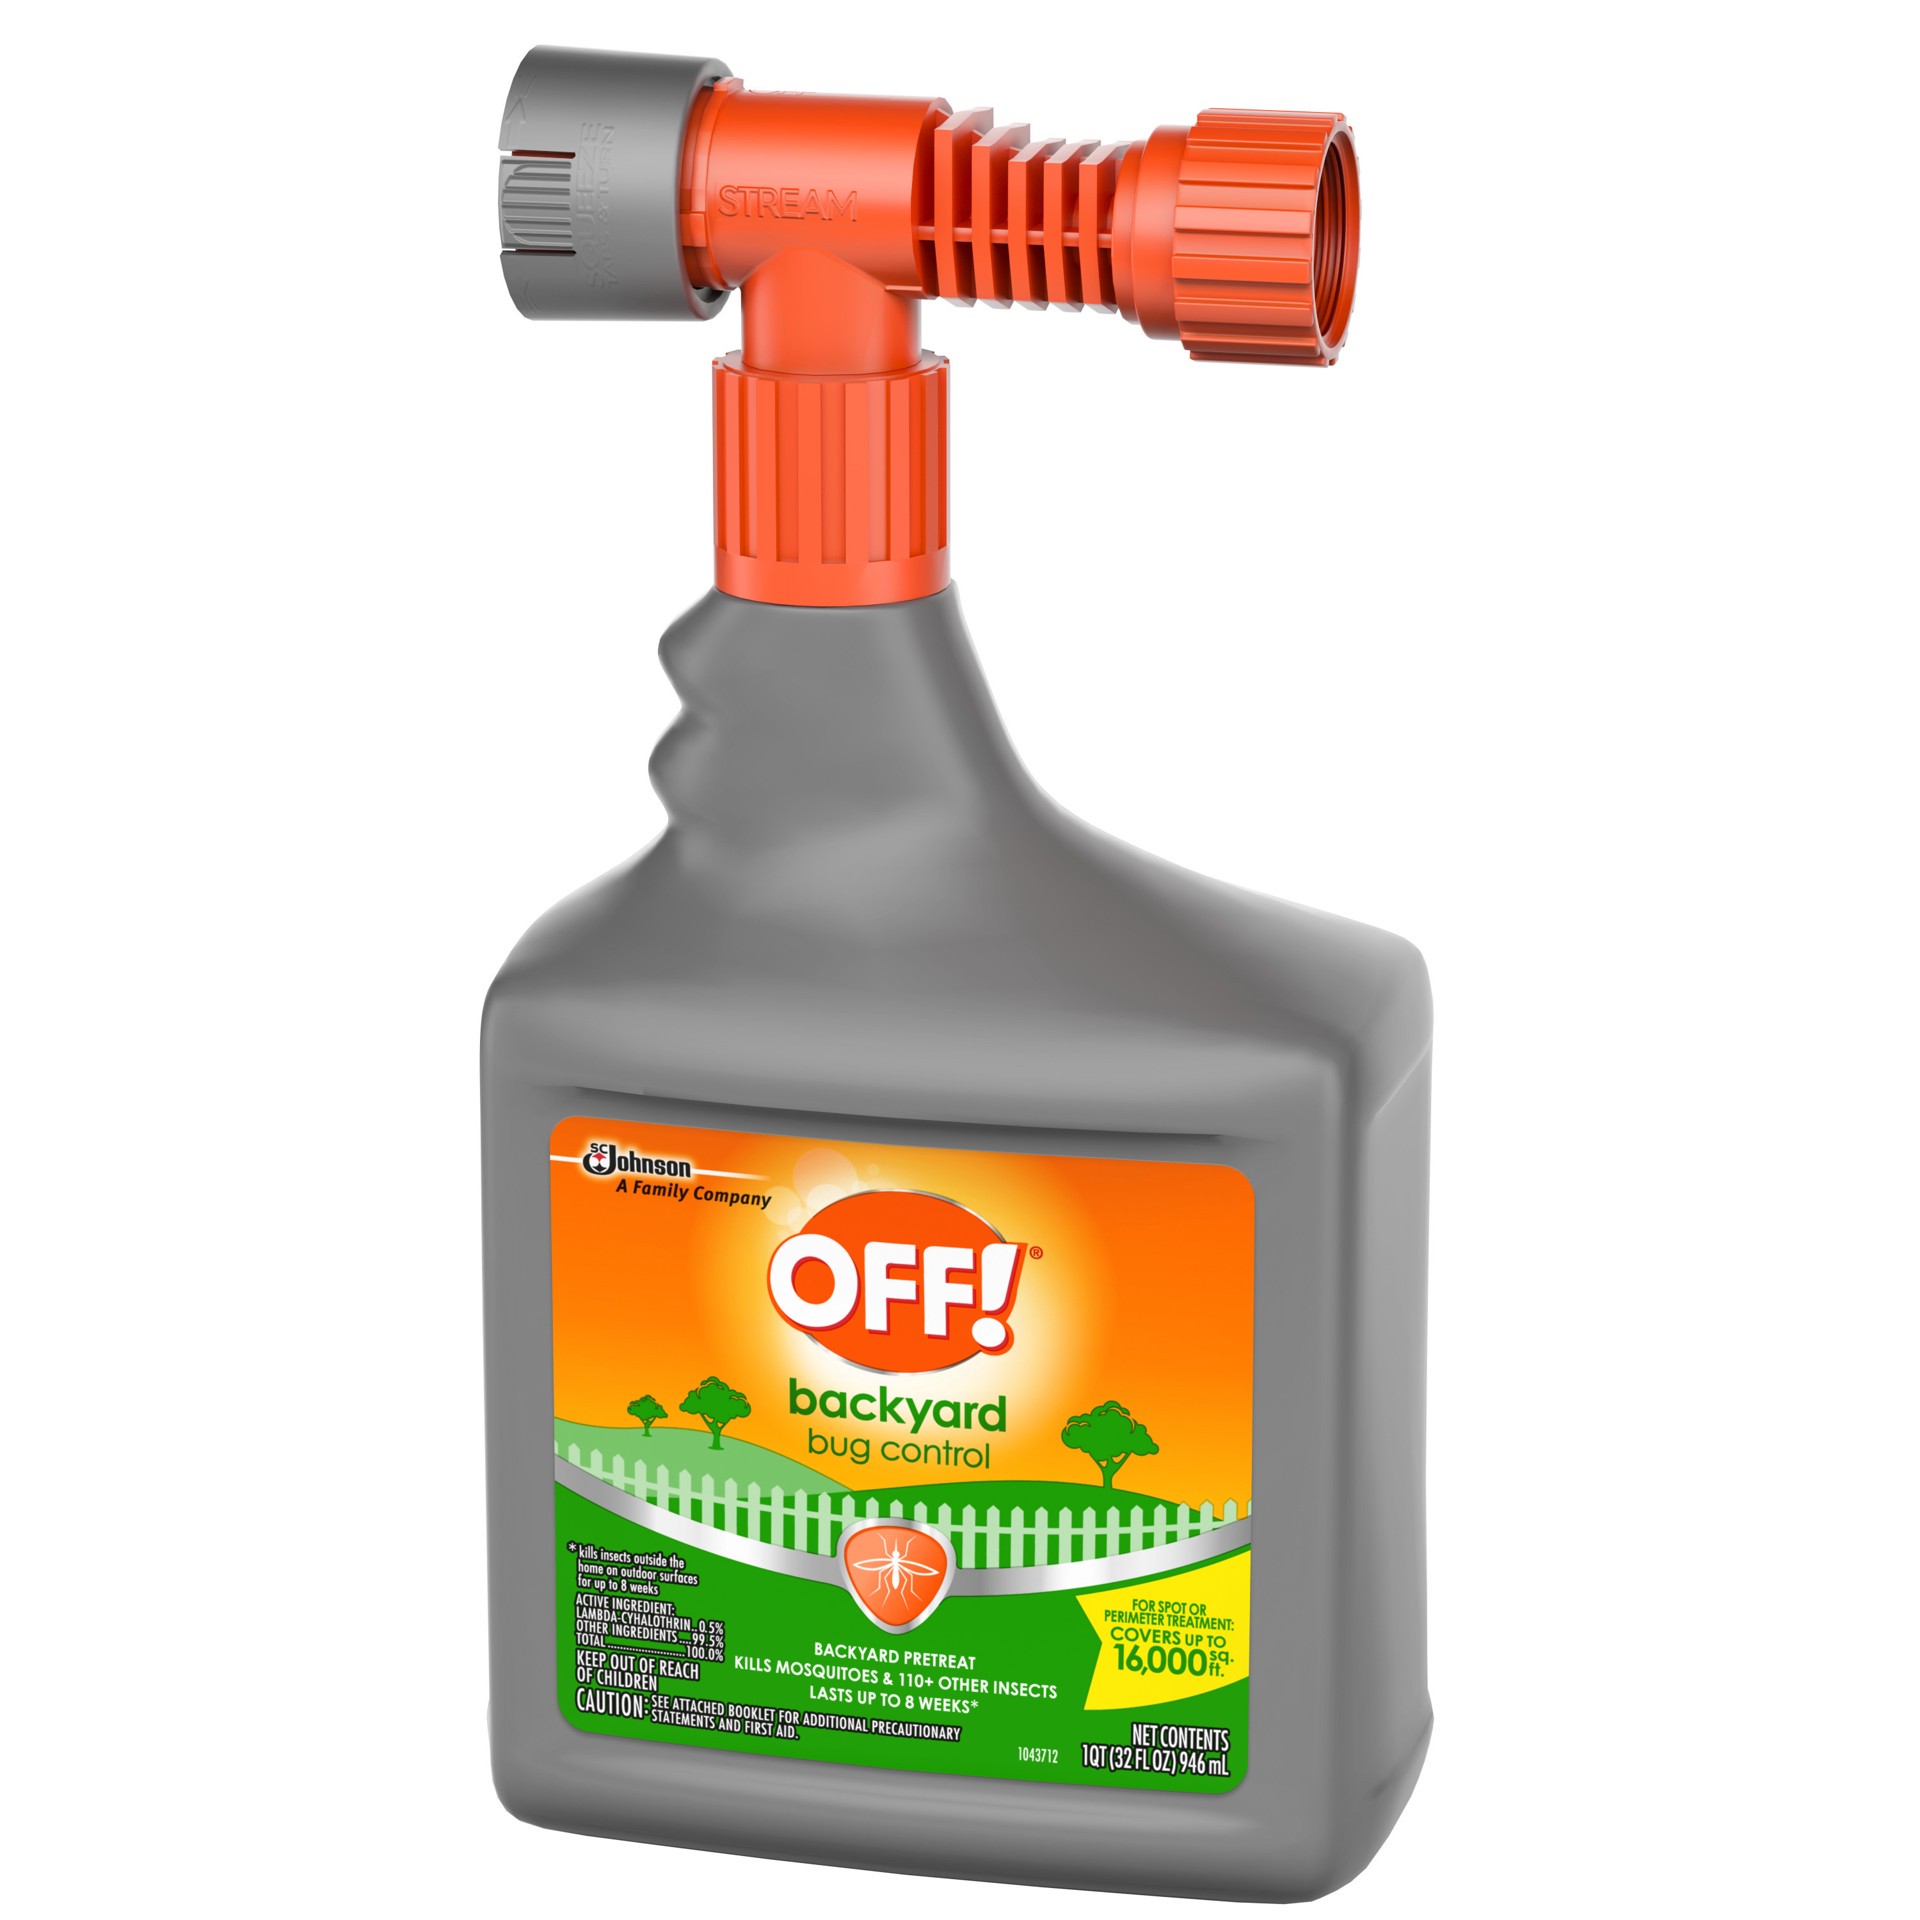 slide 2 of 5, OFF! Backyard Bug Control Pretreat, 32 oz, 1 CT, Outdoor Bug Treatment, Covers up to 16,000 sq. ft., Kills for up to 8 Weeks, With a Convenient Hose Connection, 32 fl oz